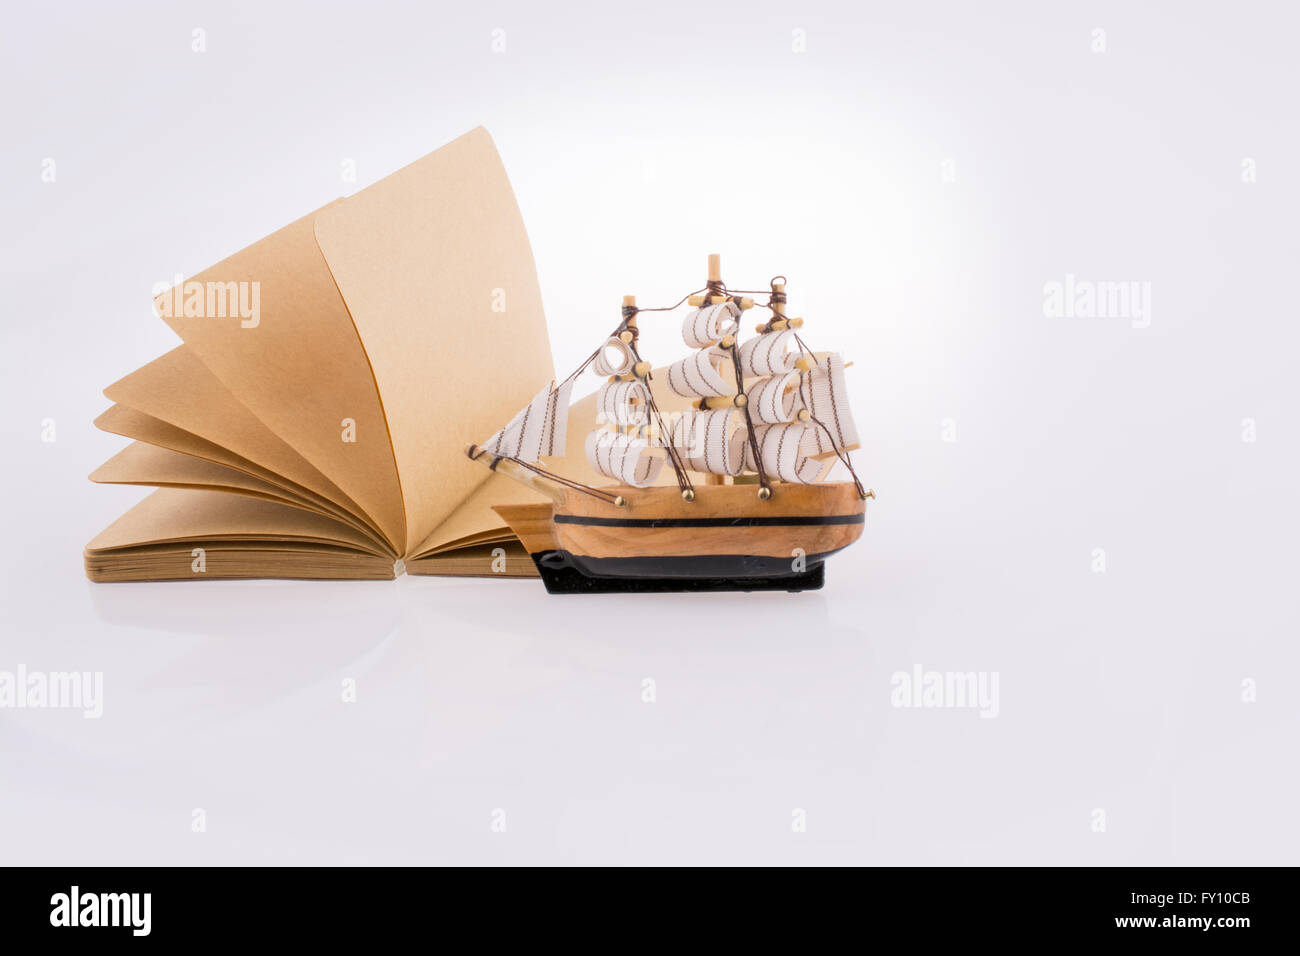 Old Ship On A Notebook On A White Background Stock Photo Royalty